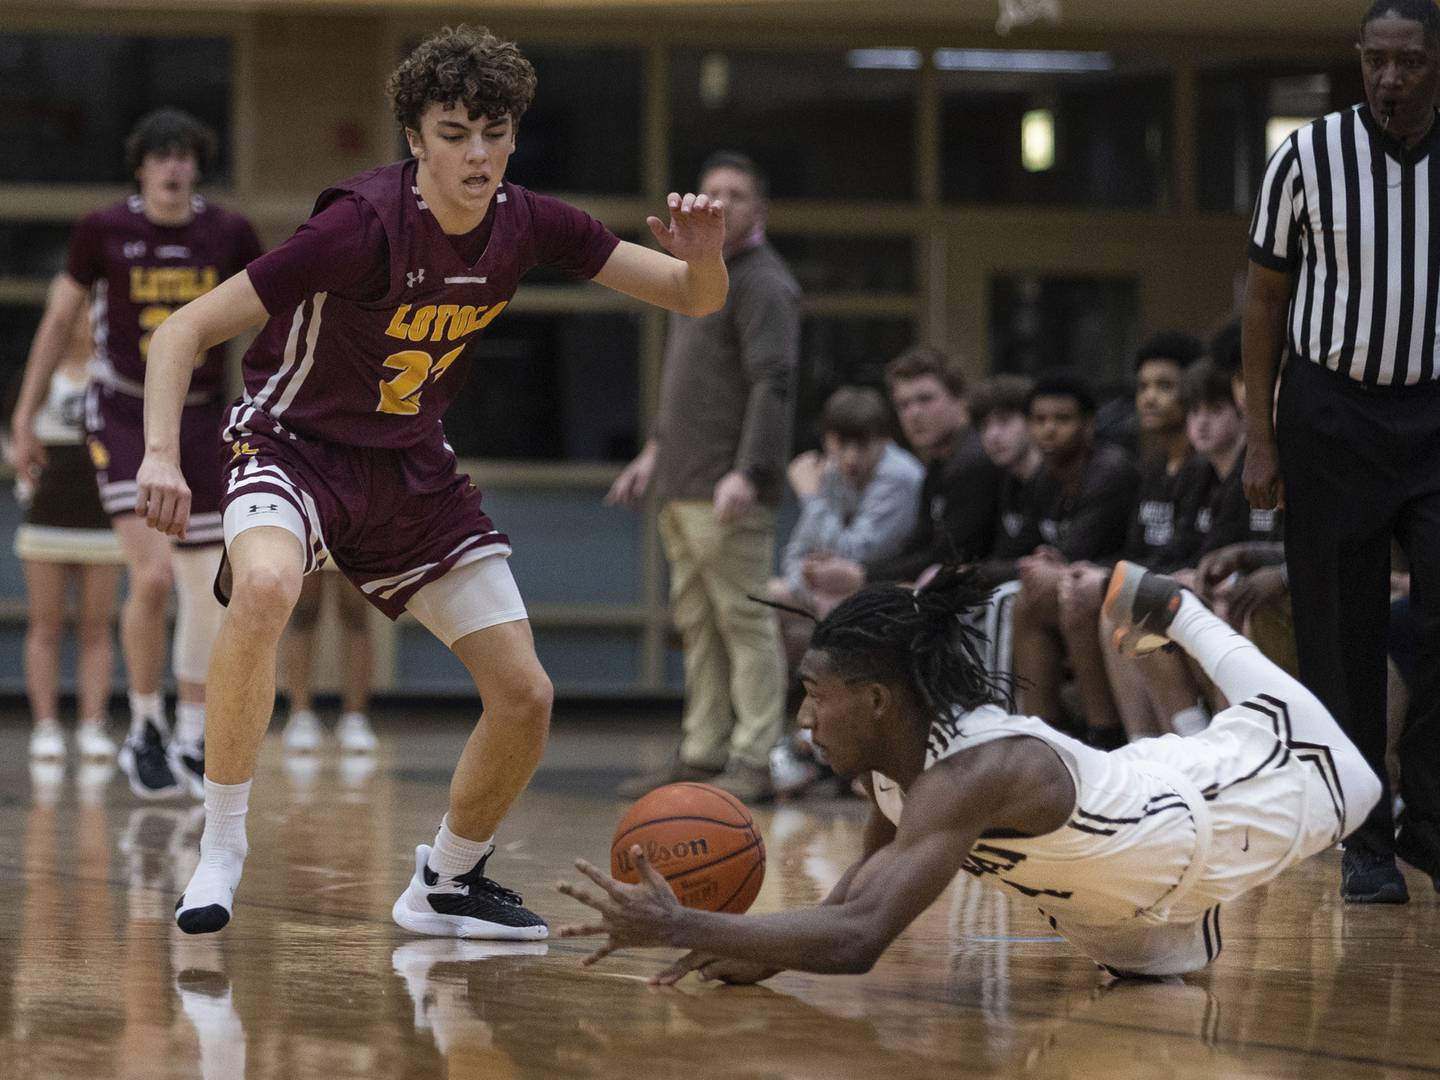 Mount Carmel's DeAndre Craig (4) dives for a loose ball against Loyola during a Catholic League Blue game in Chicago on Tuesday, Dec. 20, 2022.